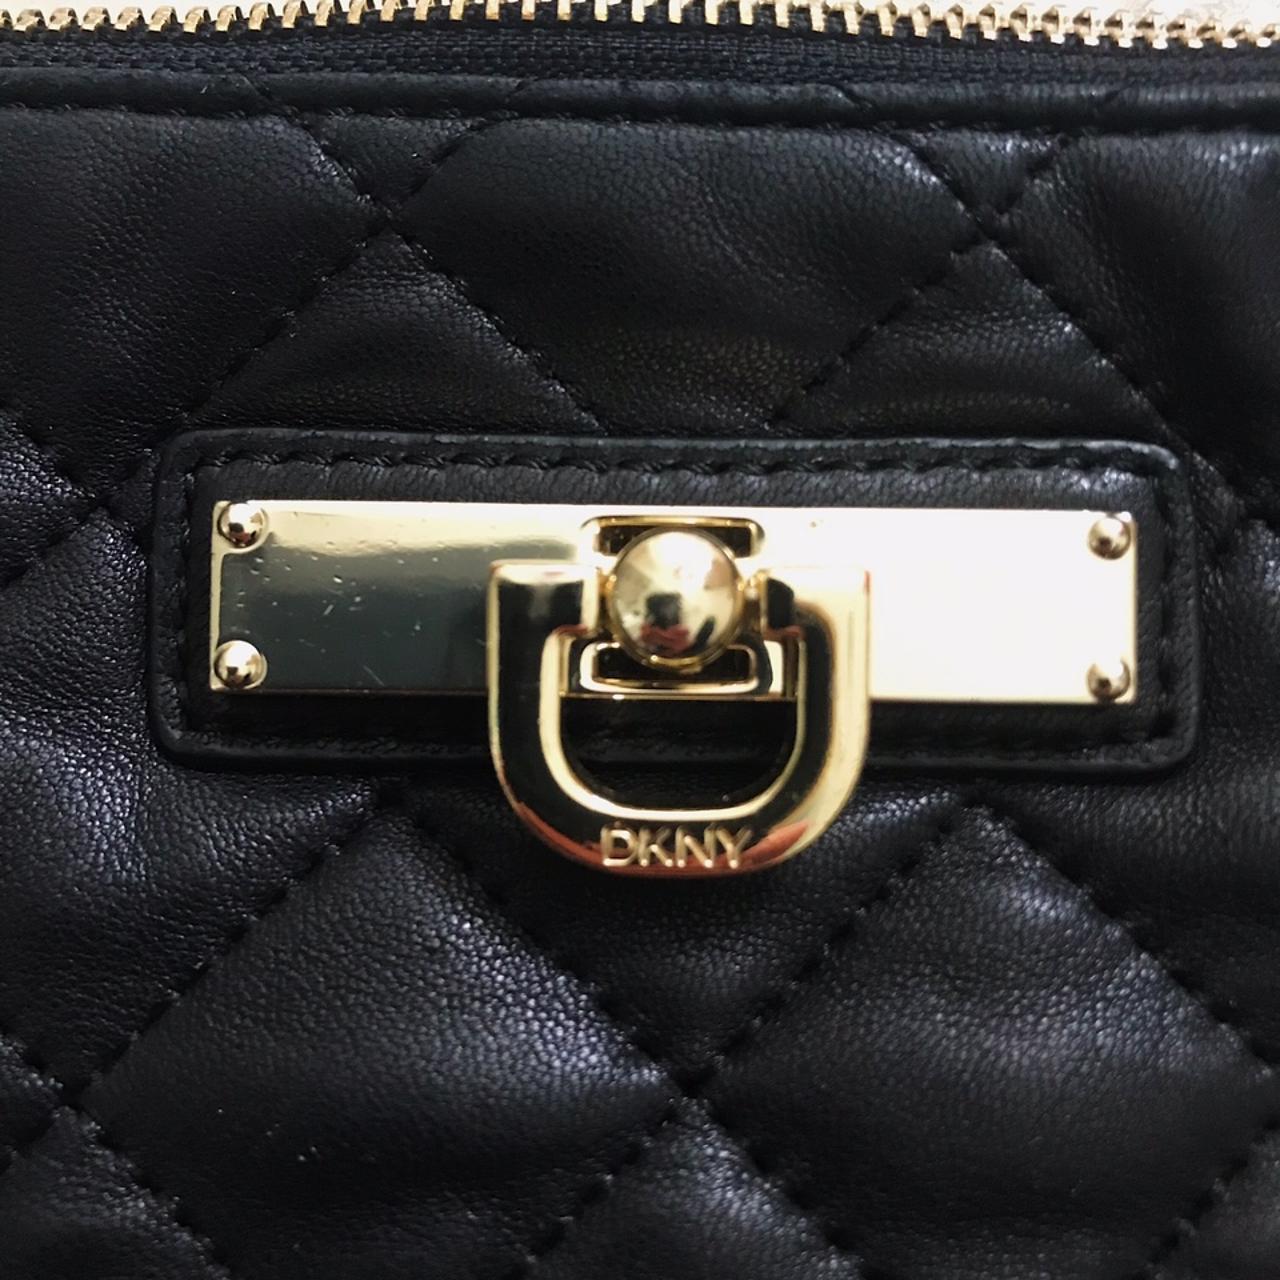 Dkny saffiano leather bag with gold hardware Bought - Depop